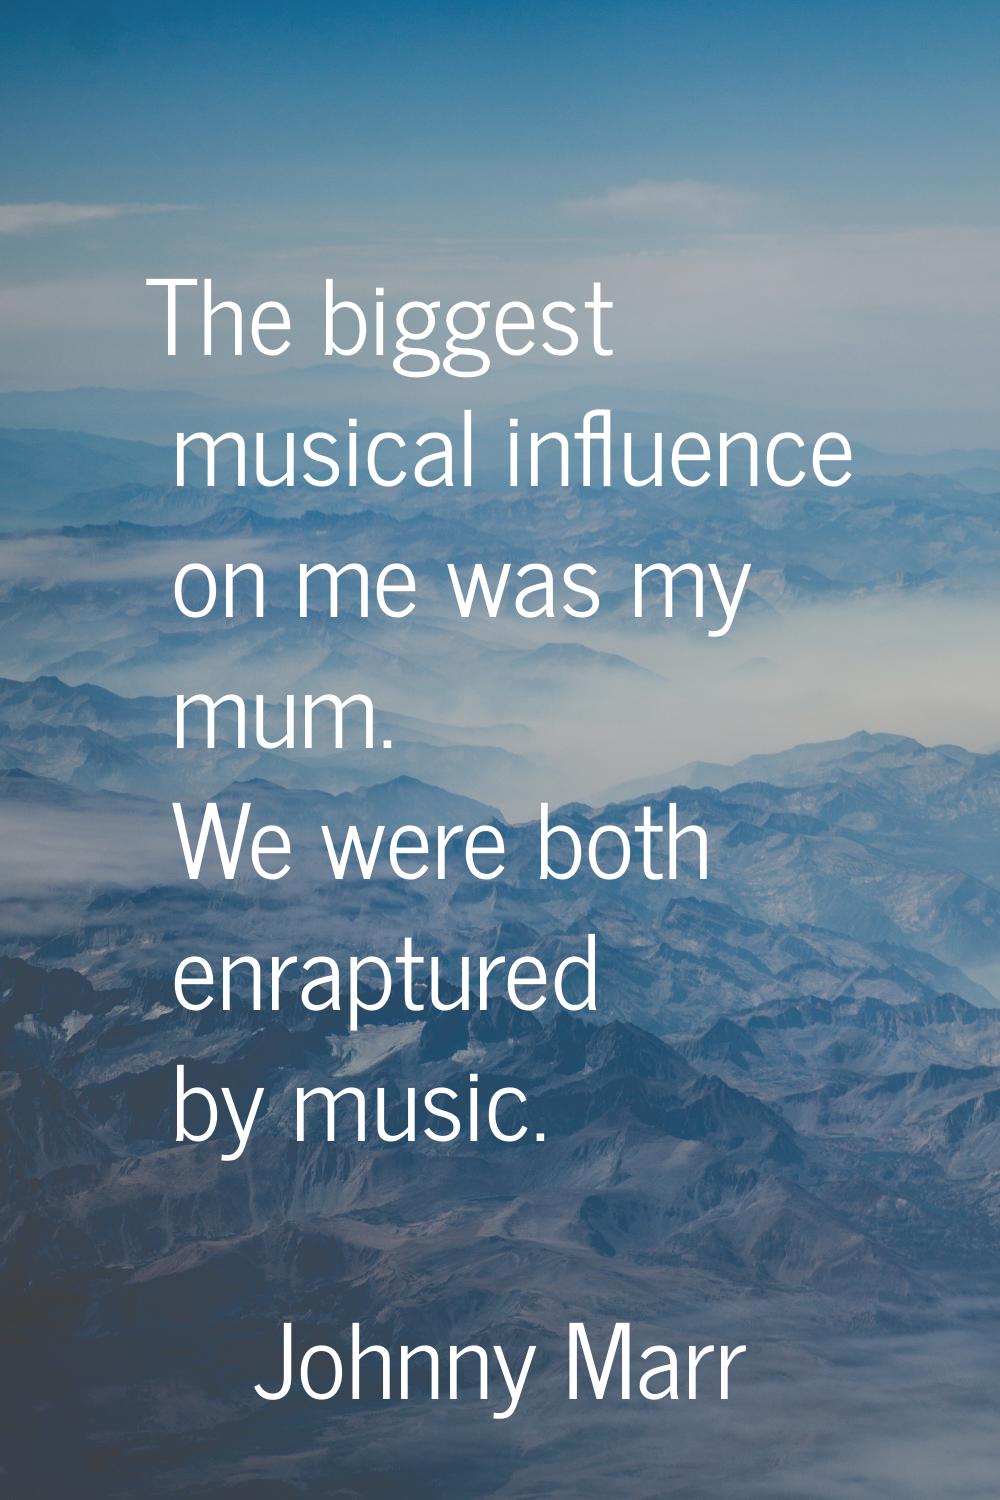 The biggest musical influence on me was my mum. We were both enraptured by music.